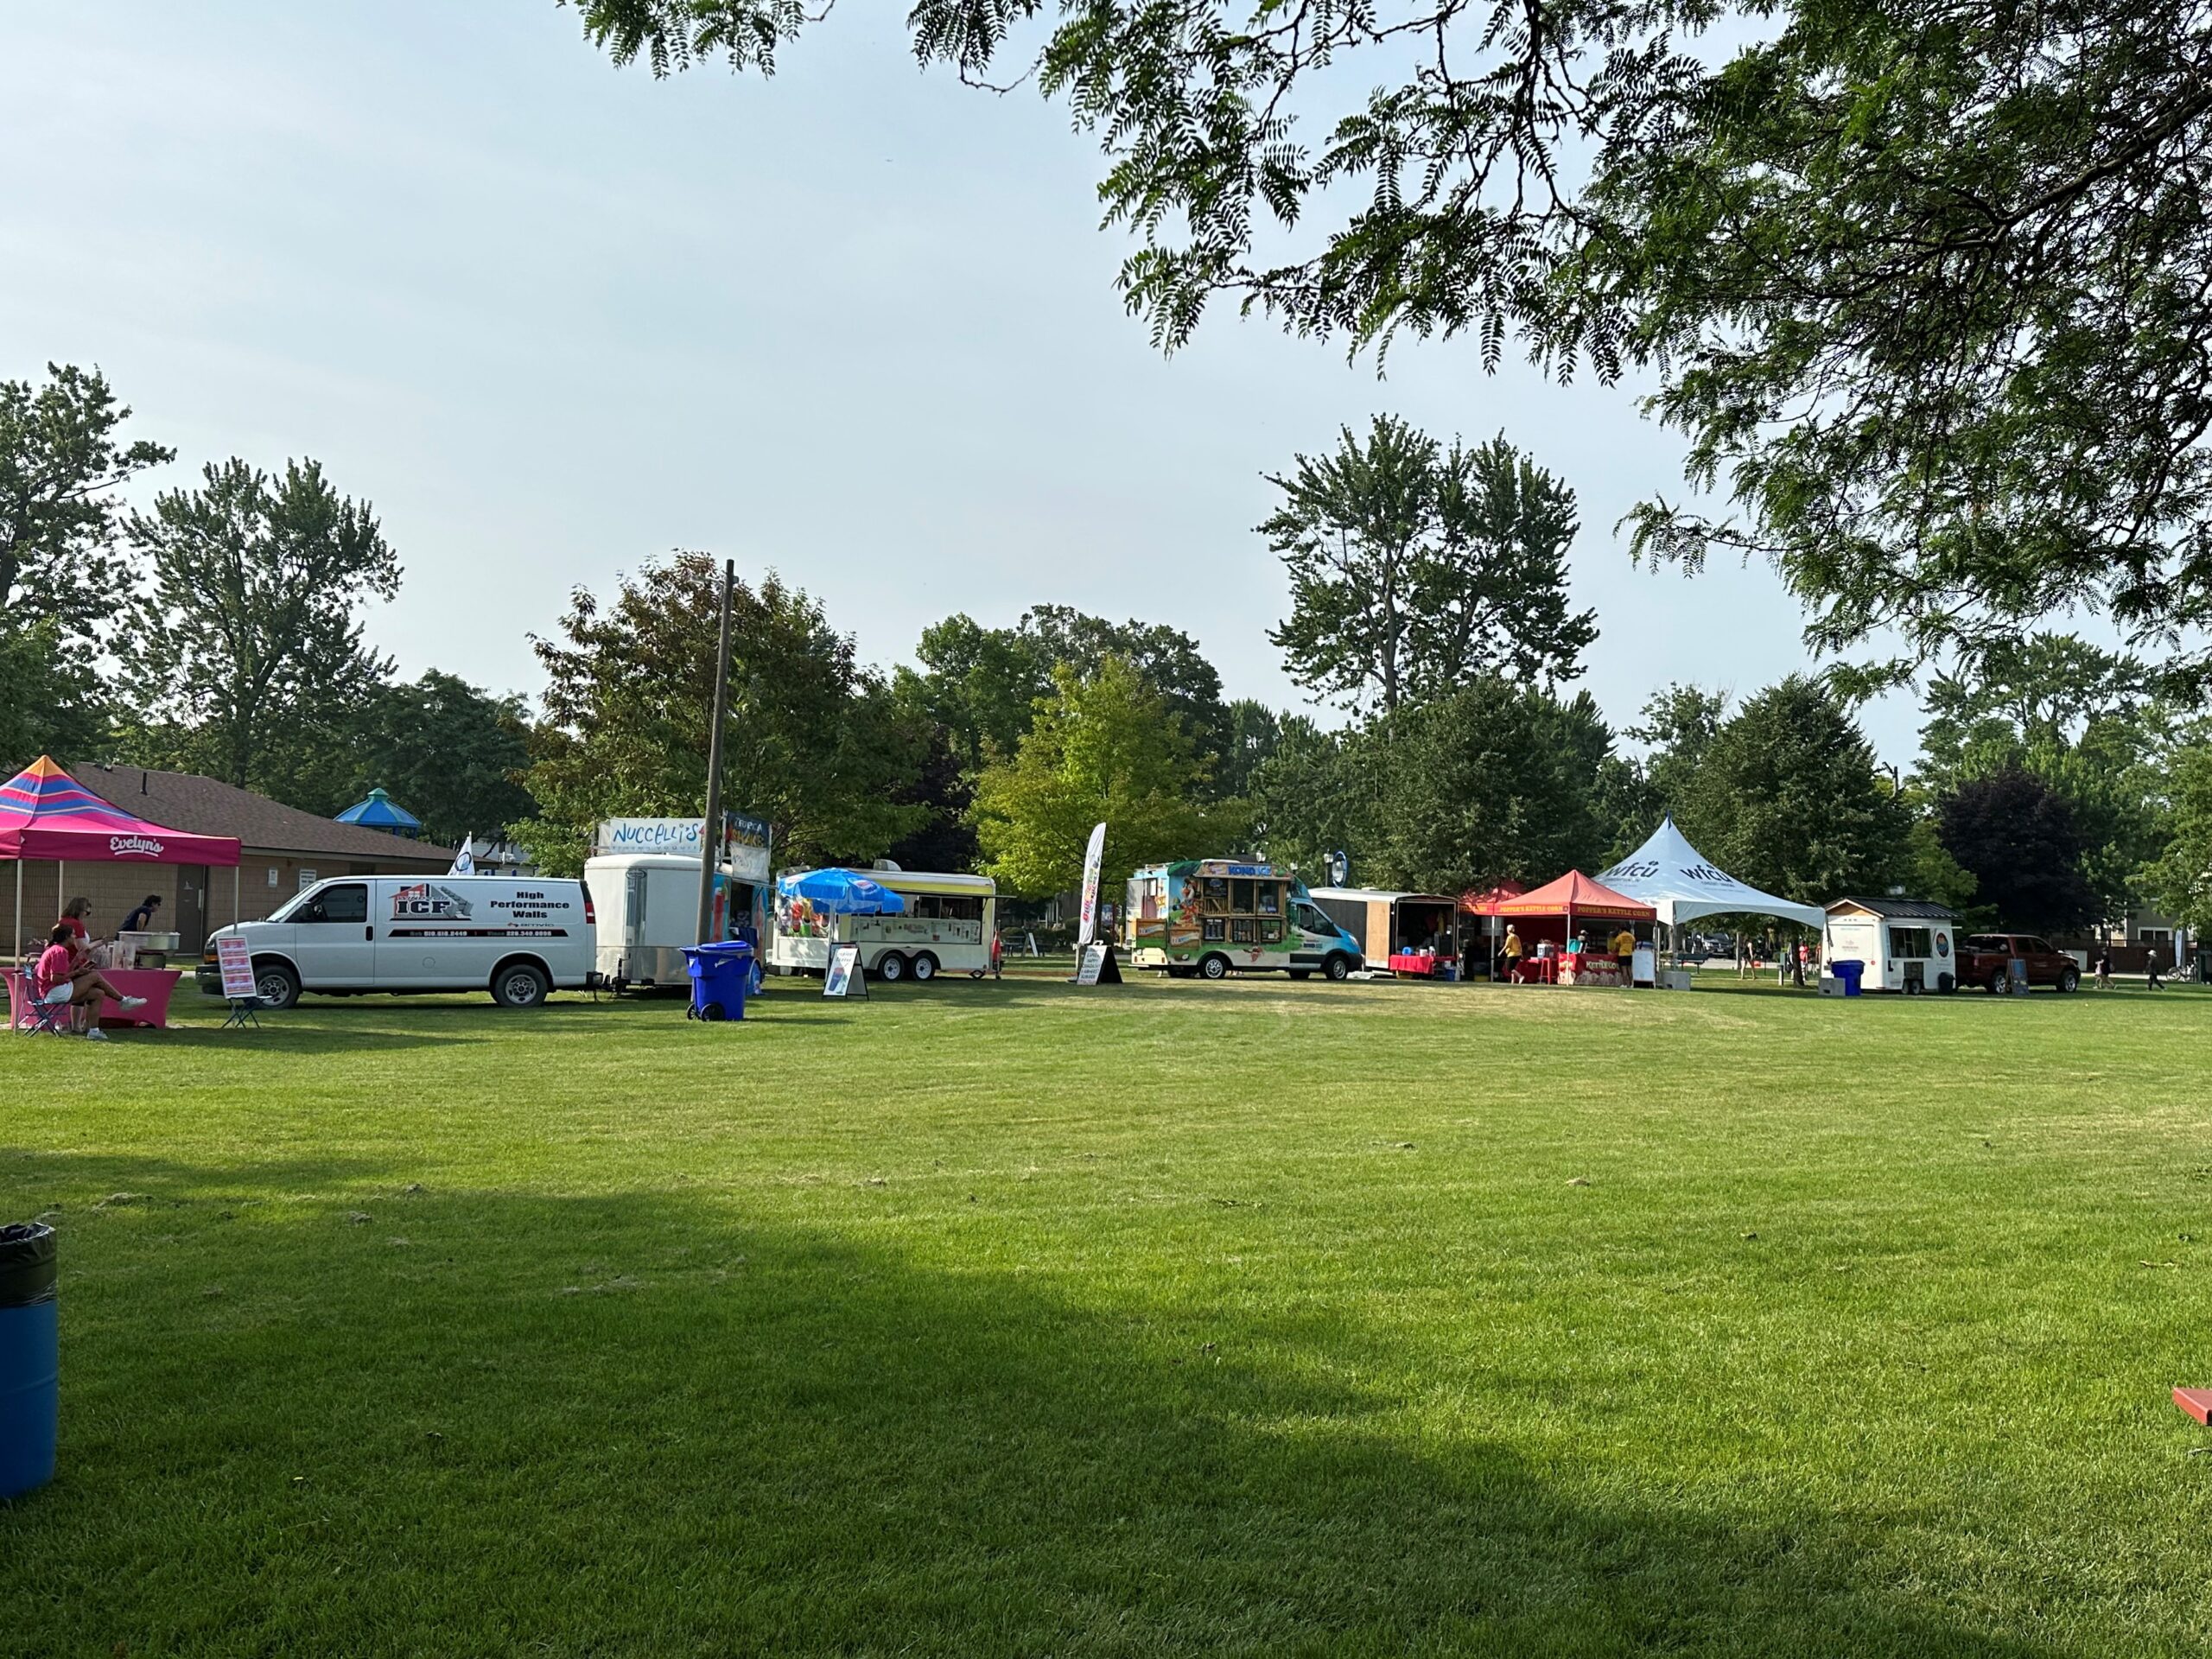 line of different food trucks on the grass